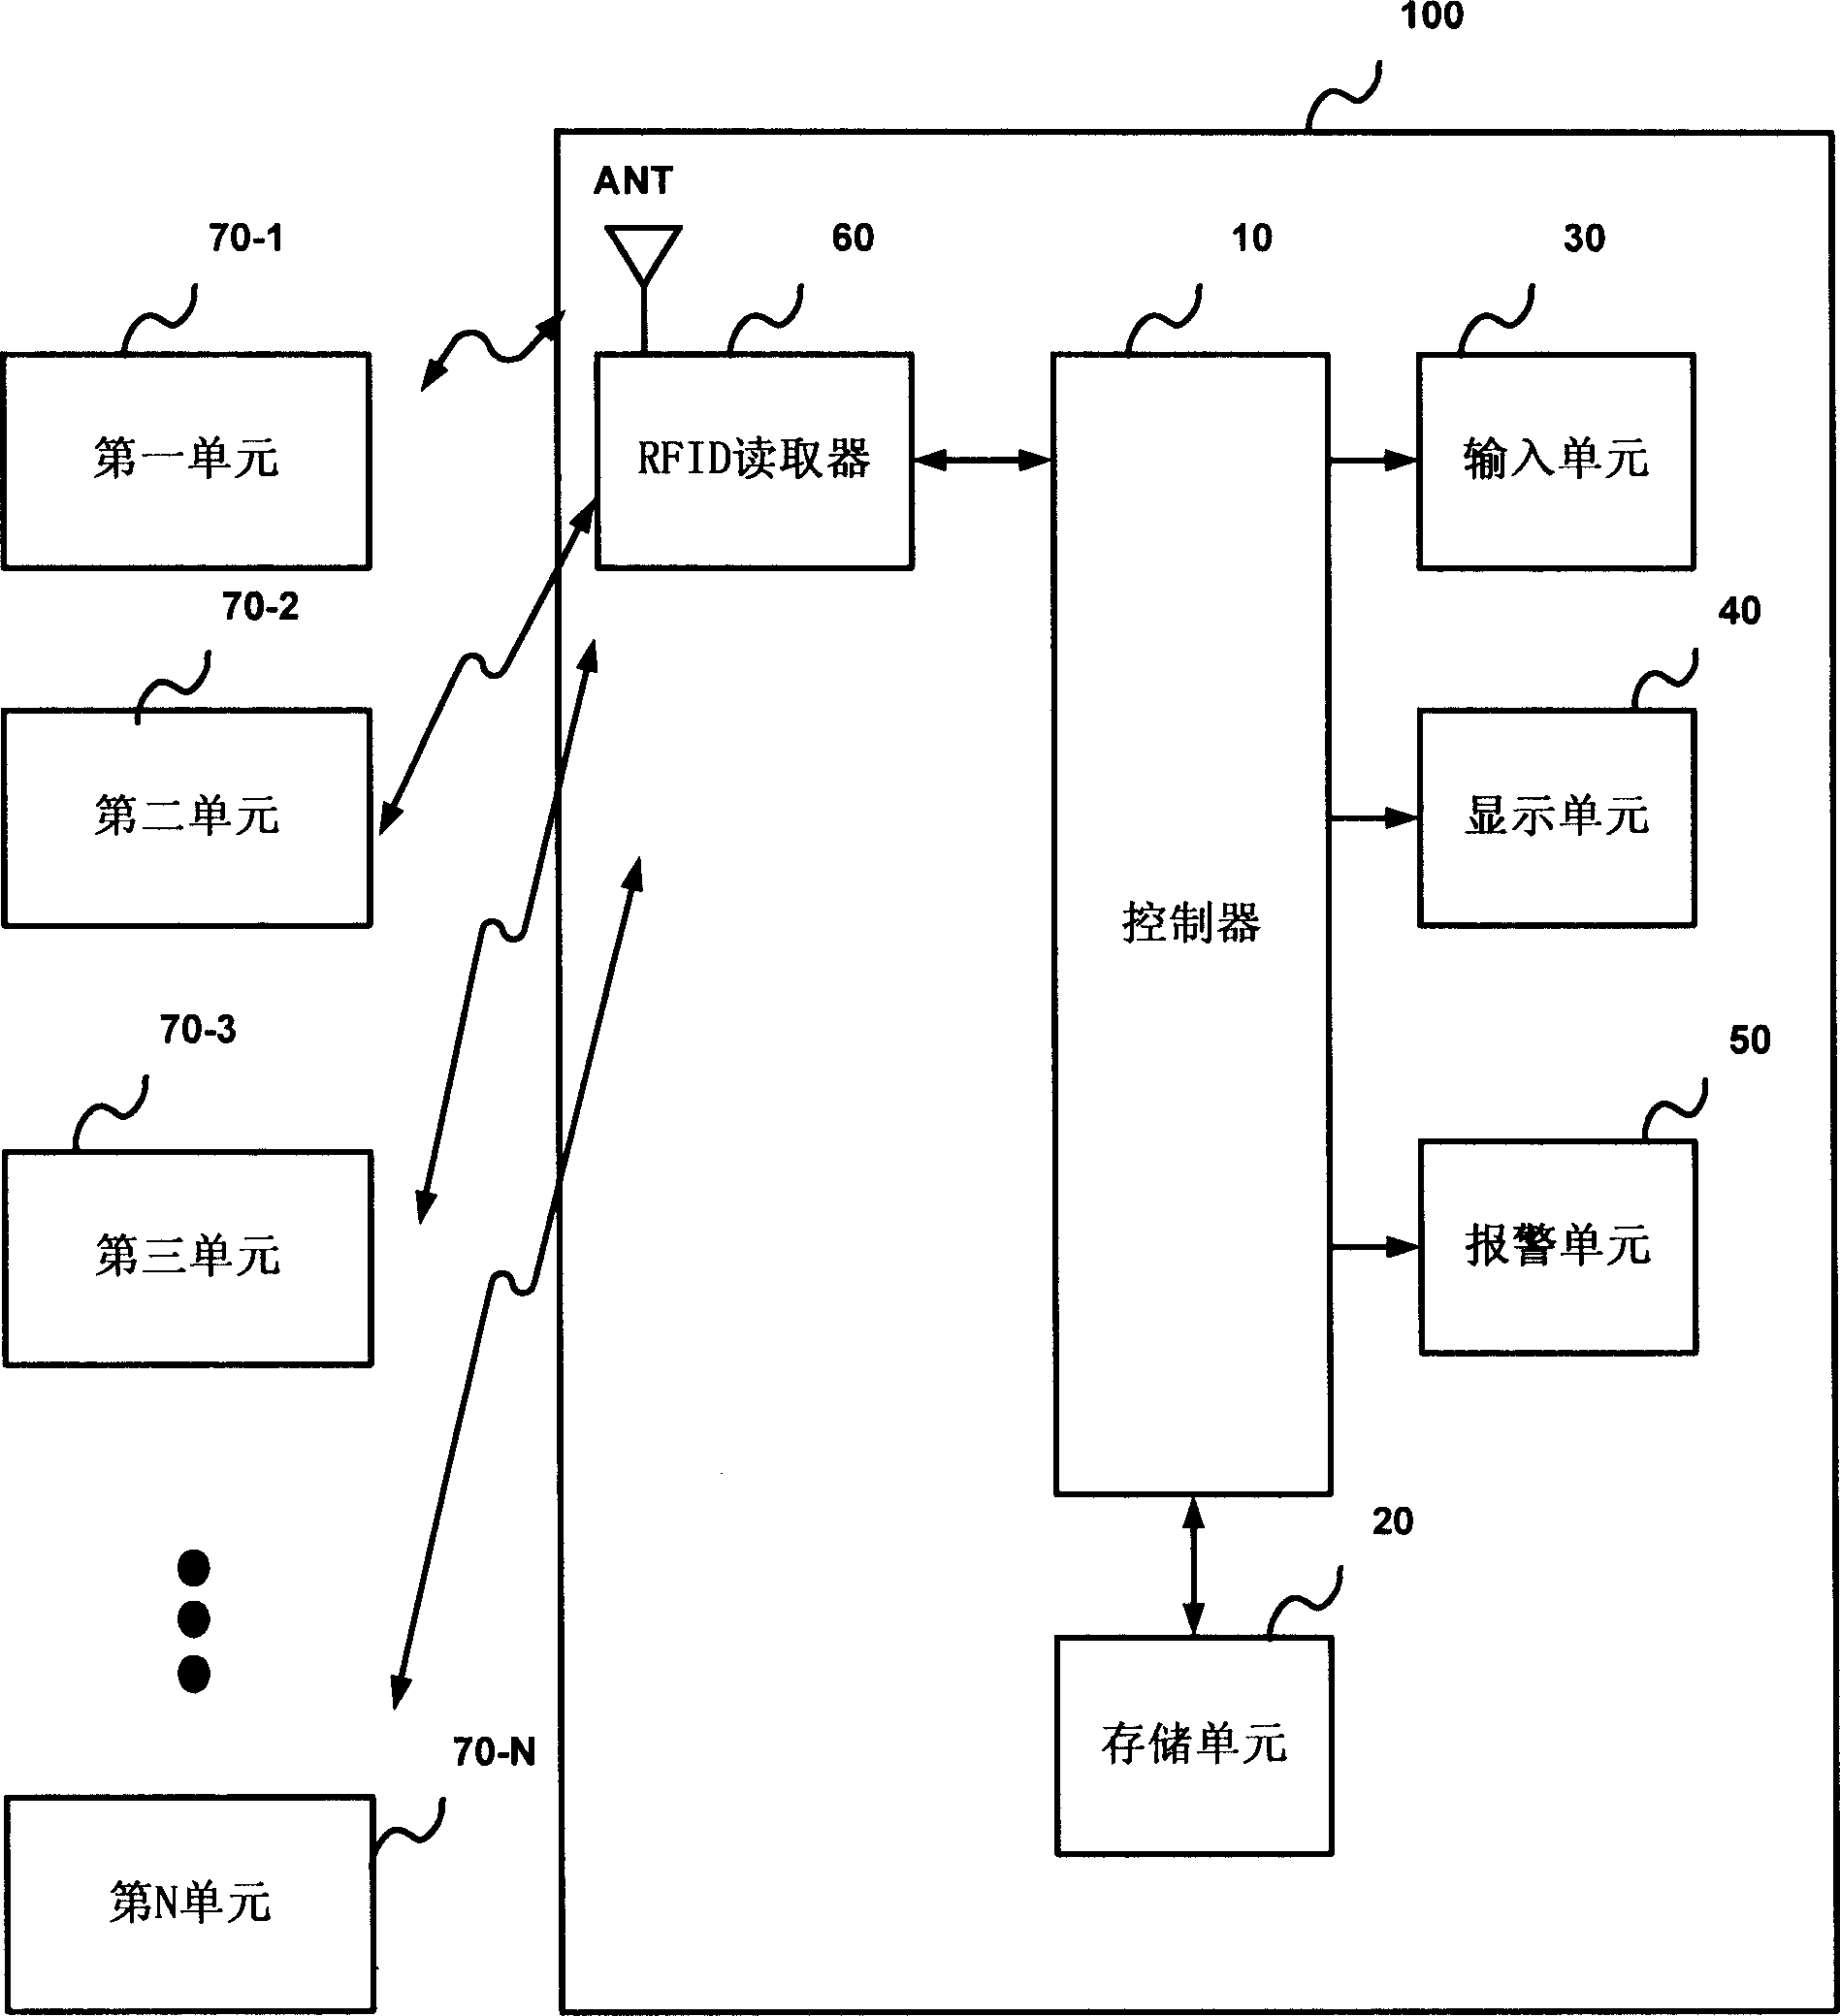 Compatibility determination apparatus and method using radio frequency identification system